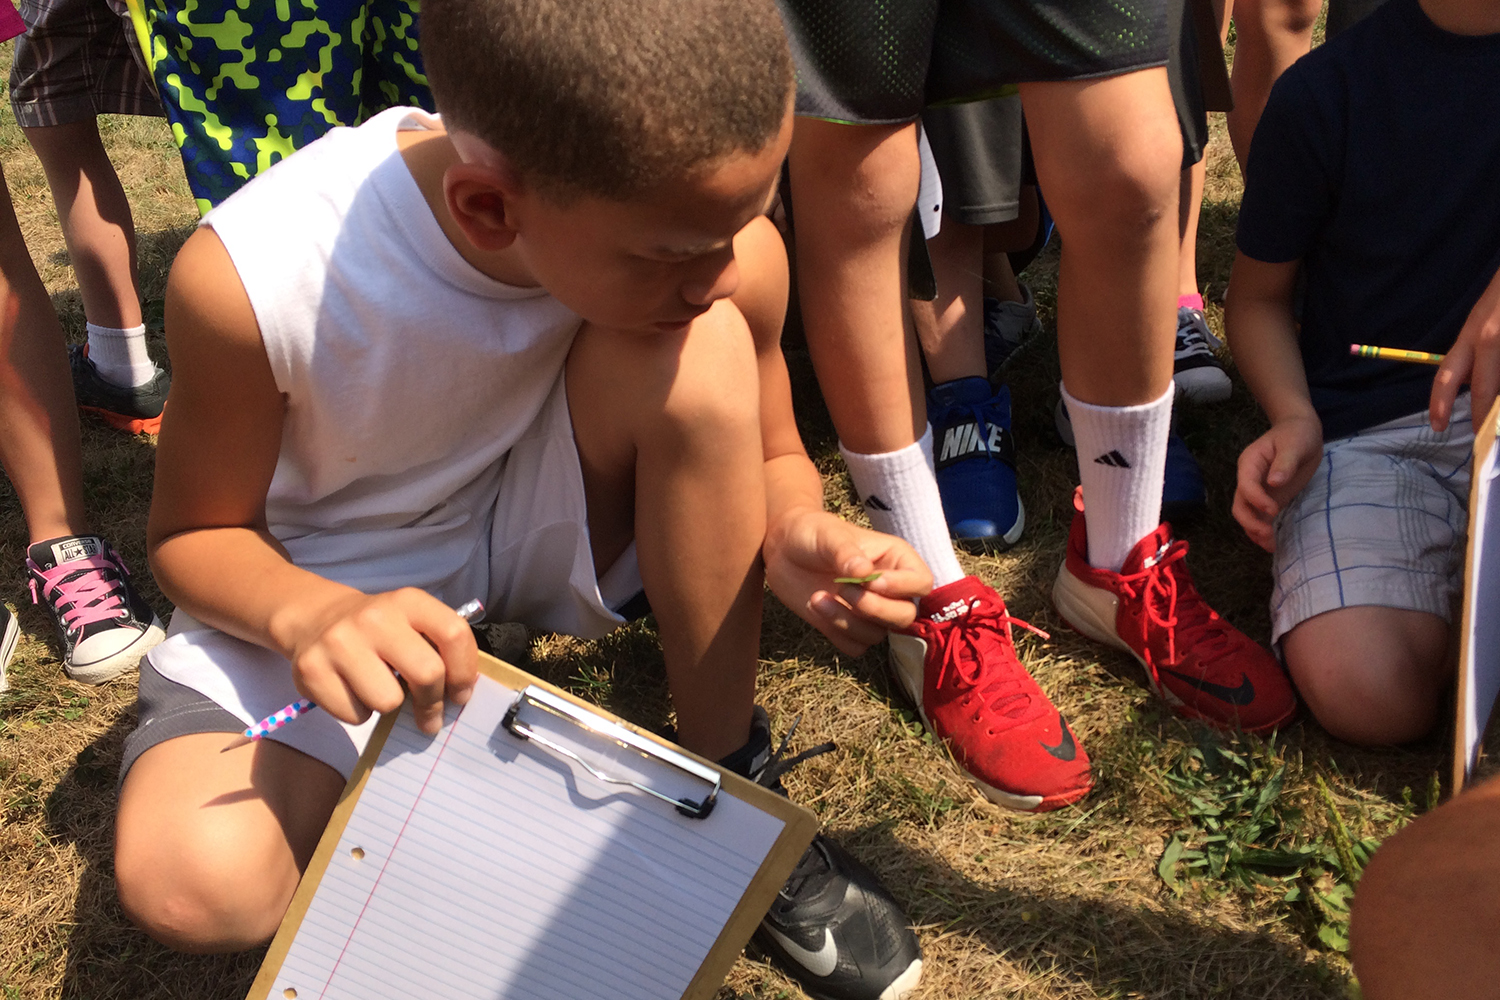 A kid squatting down on the ground, on knee up, examining a leaf, holding a clipboard and pencil, lots of shoes and legs of other kids in the background.